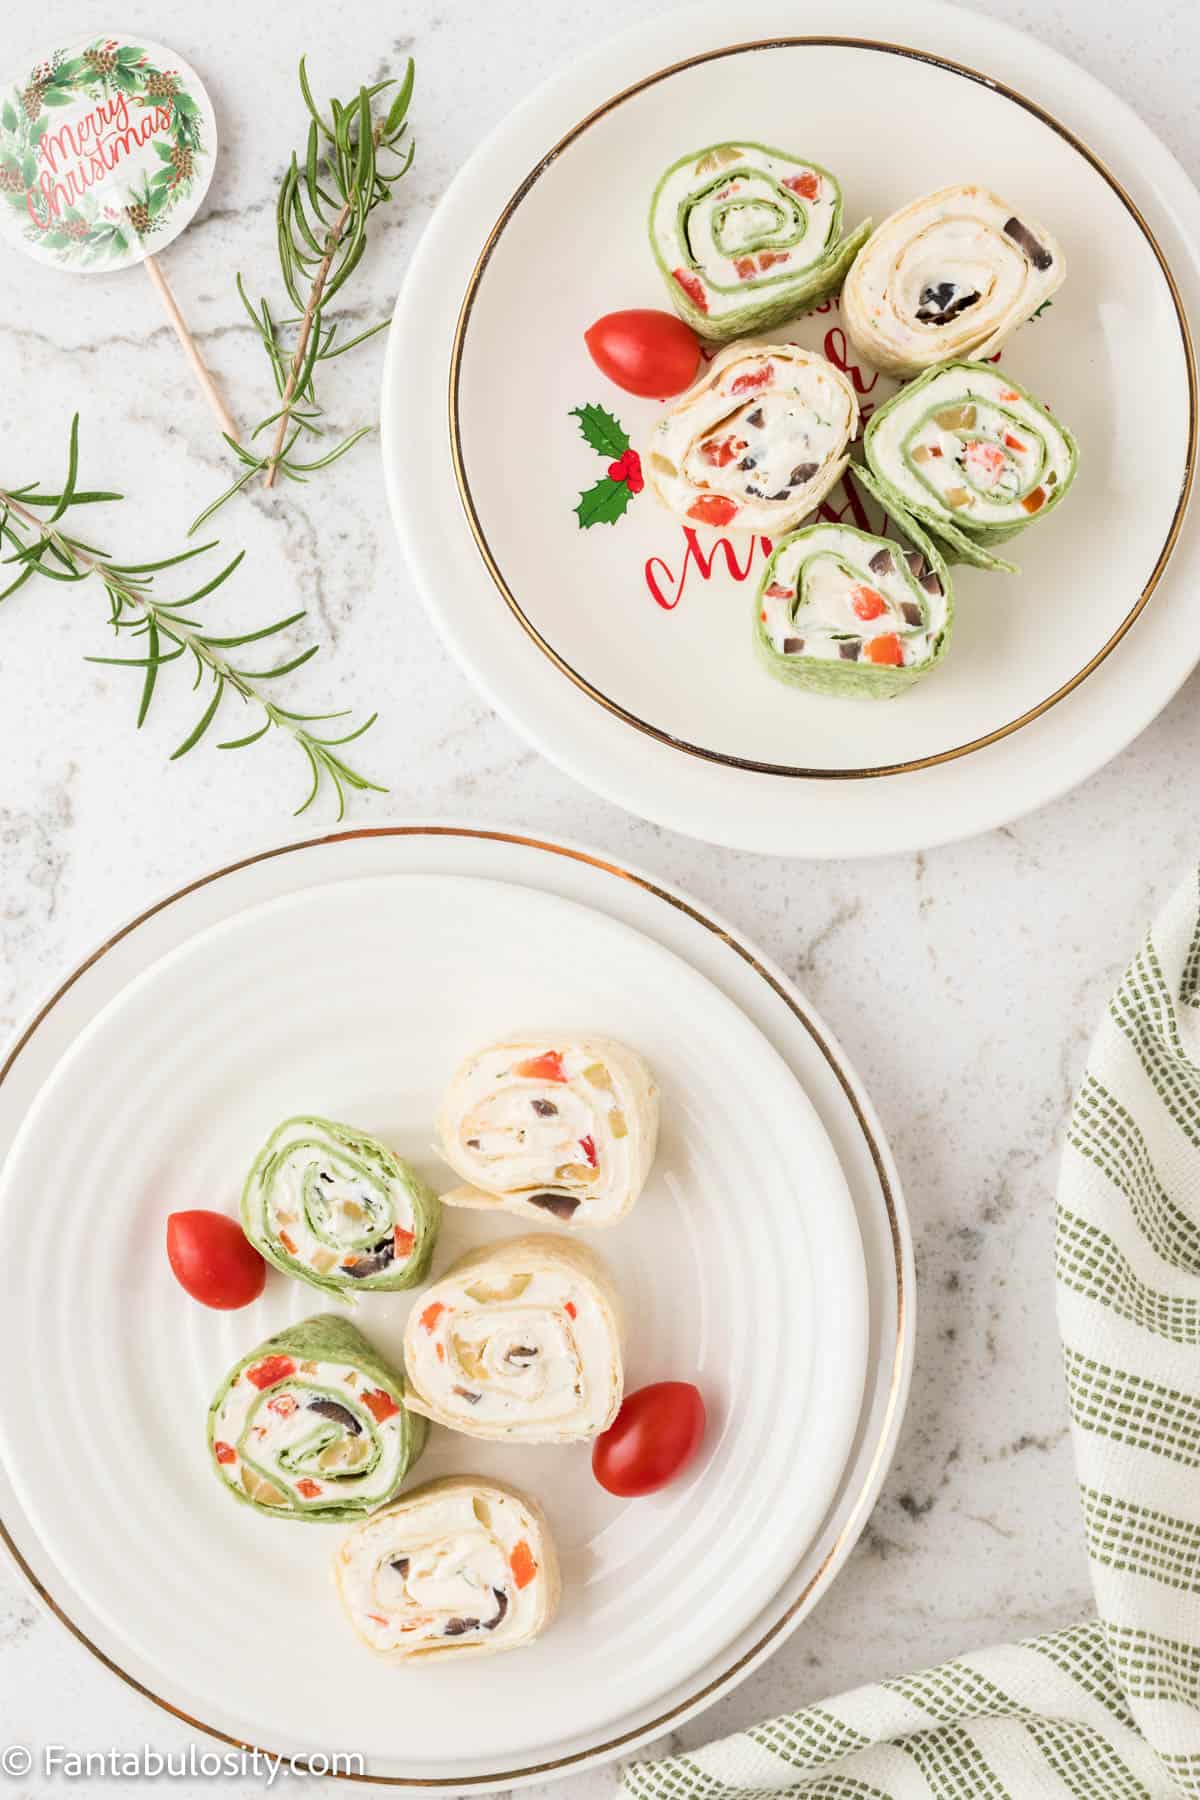 Slices of rolled tortilla pinwheels are served on two white plates, you can see the cream cheese filling studded with olives and pimientos